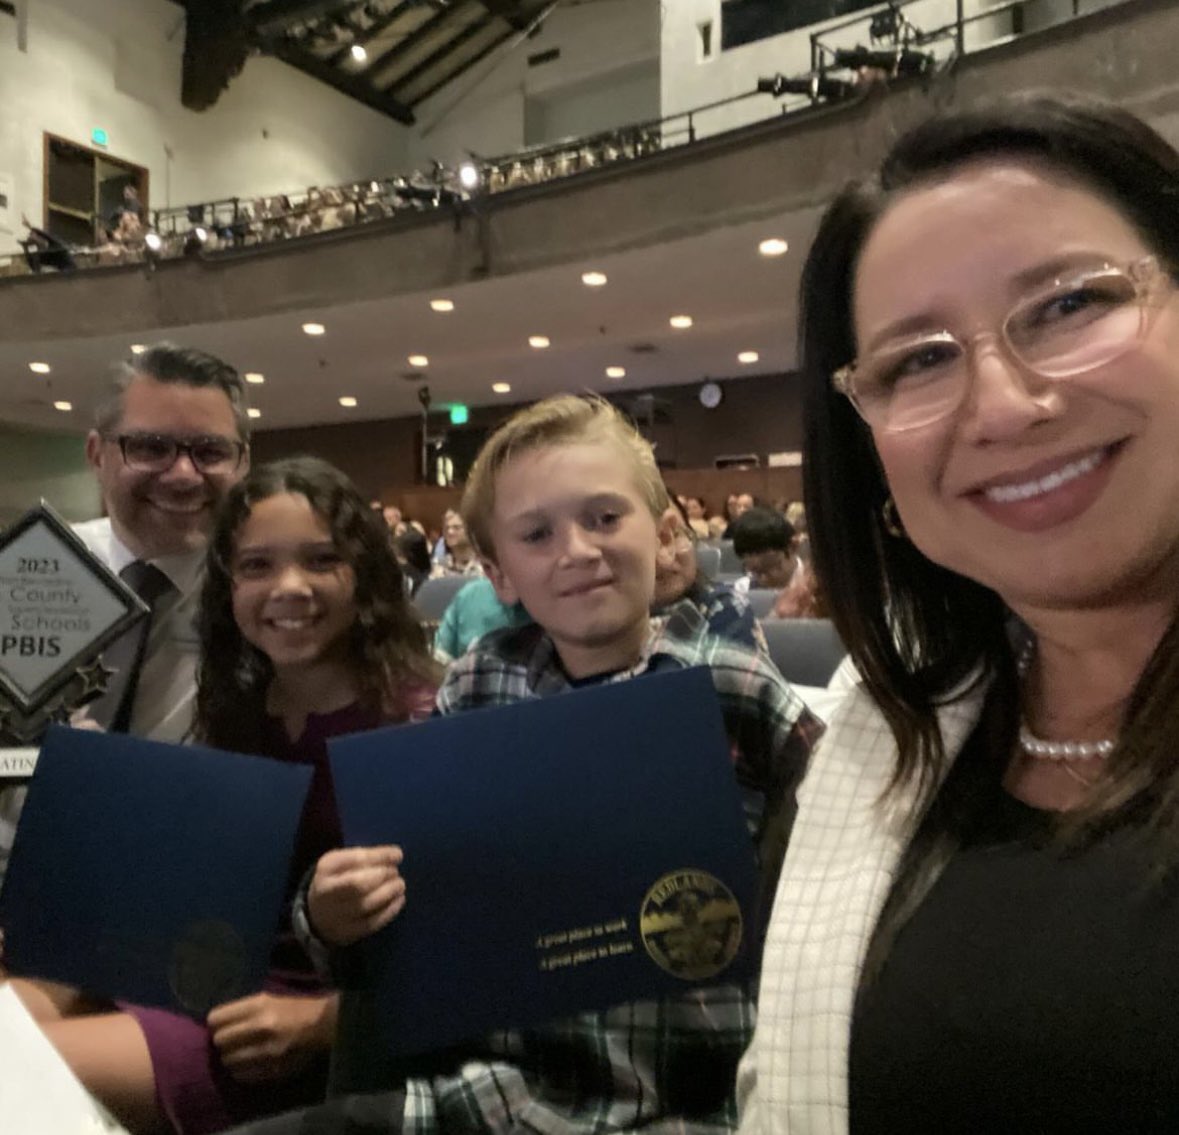 Two of our best Mustangs were honored last night at the @RedlandsUSD Superintendent’s Awards Night by @RedlandsUSDSupt. These two were recognized for their awesome academics and citizenship. #missionmustangs #mustangpride #ThisIsRUSD